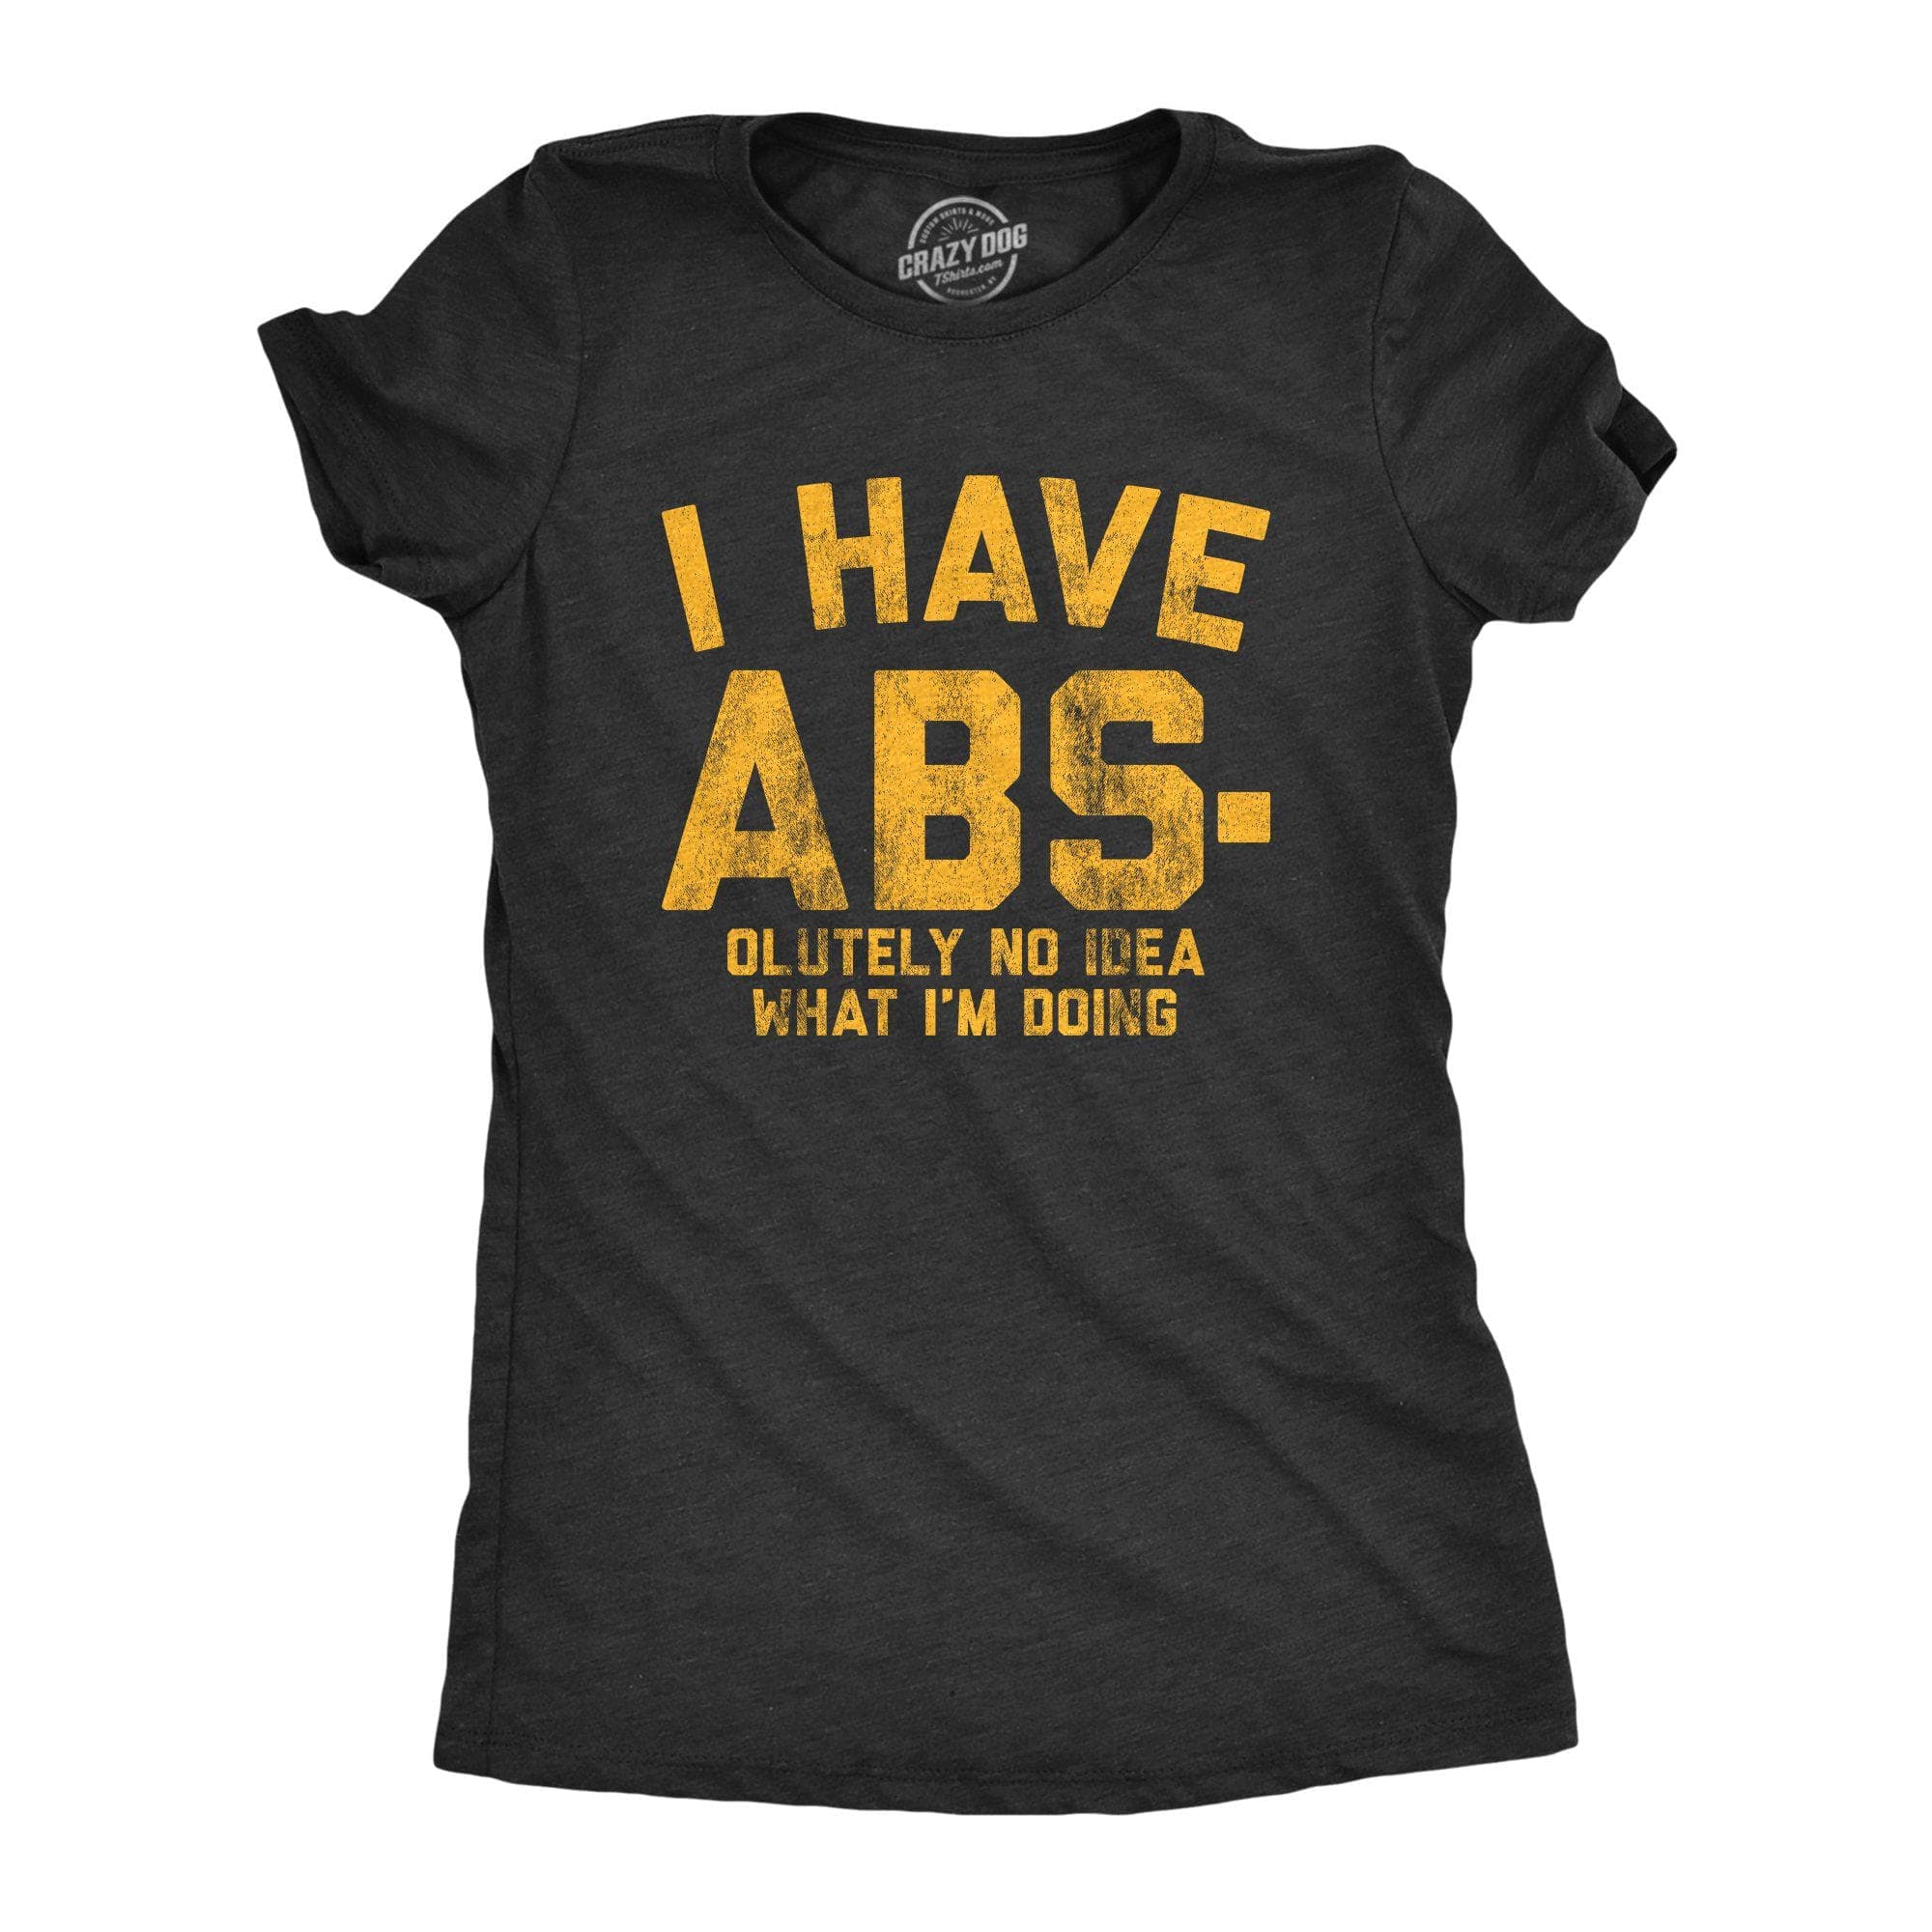 I Have Abs-olutely No Idea What I'm Doing Women's Tshirt - Crazy Dog T-Shirts